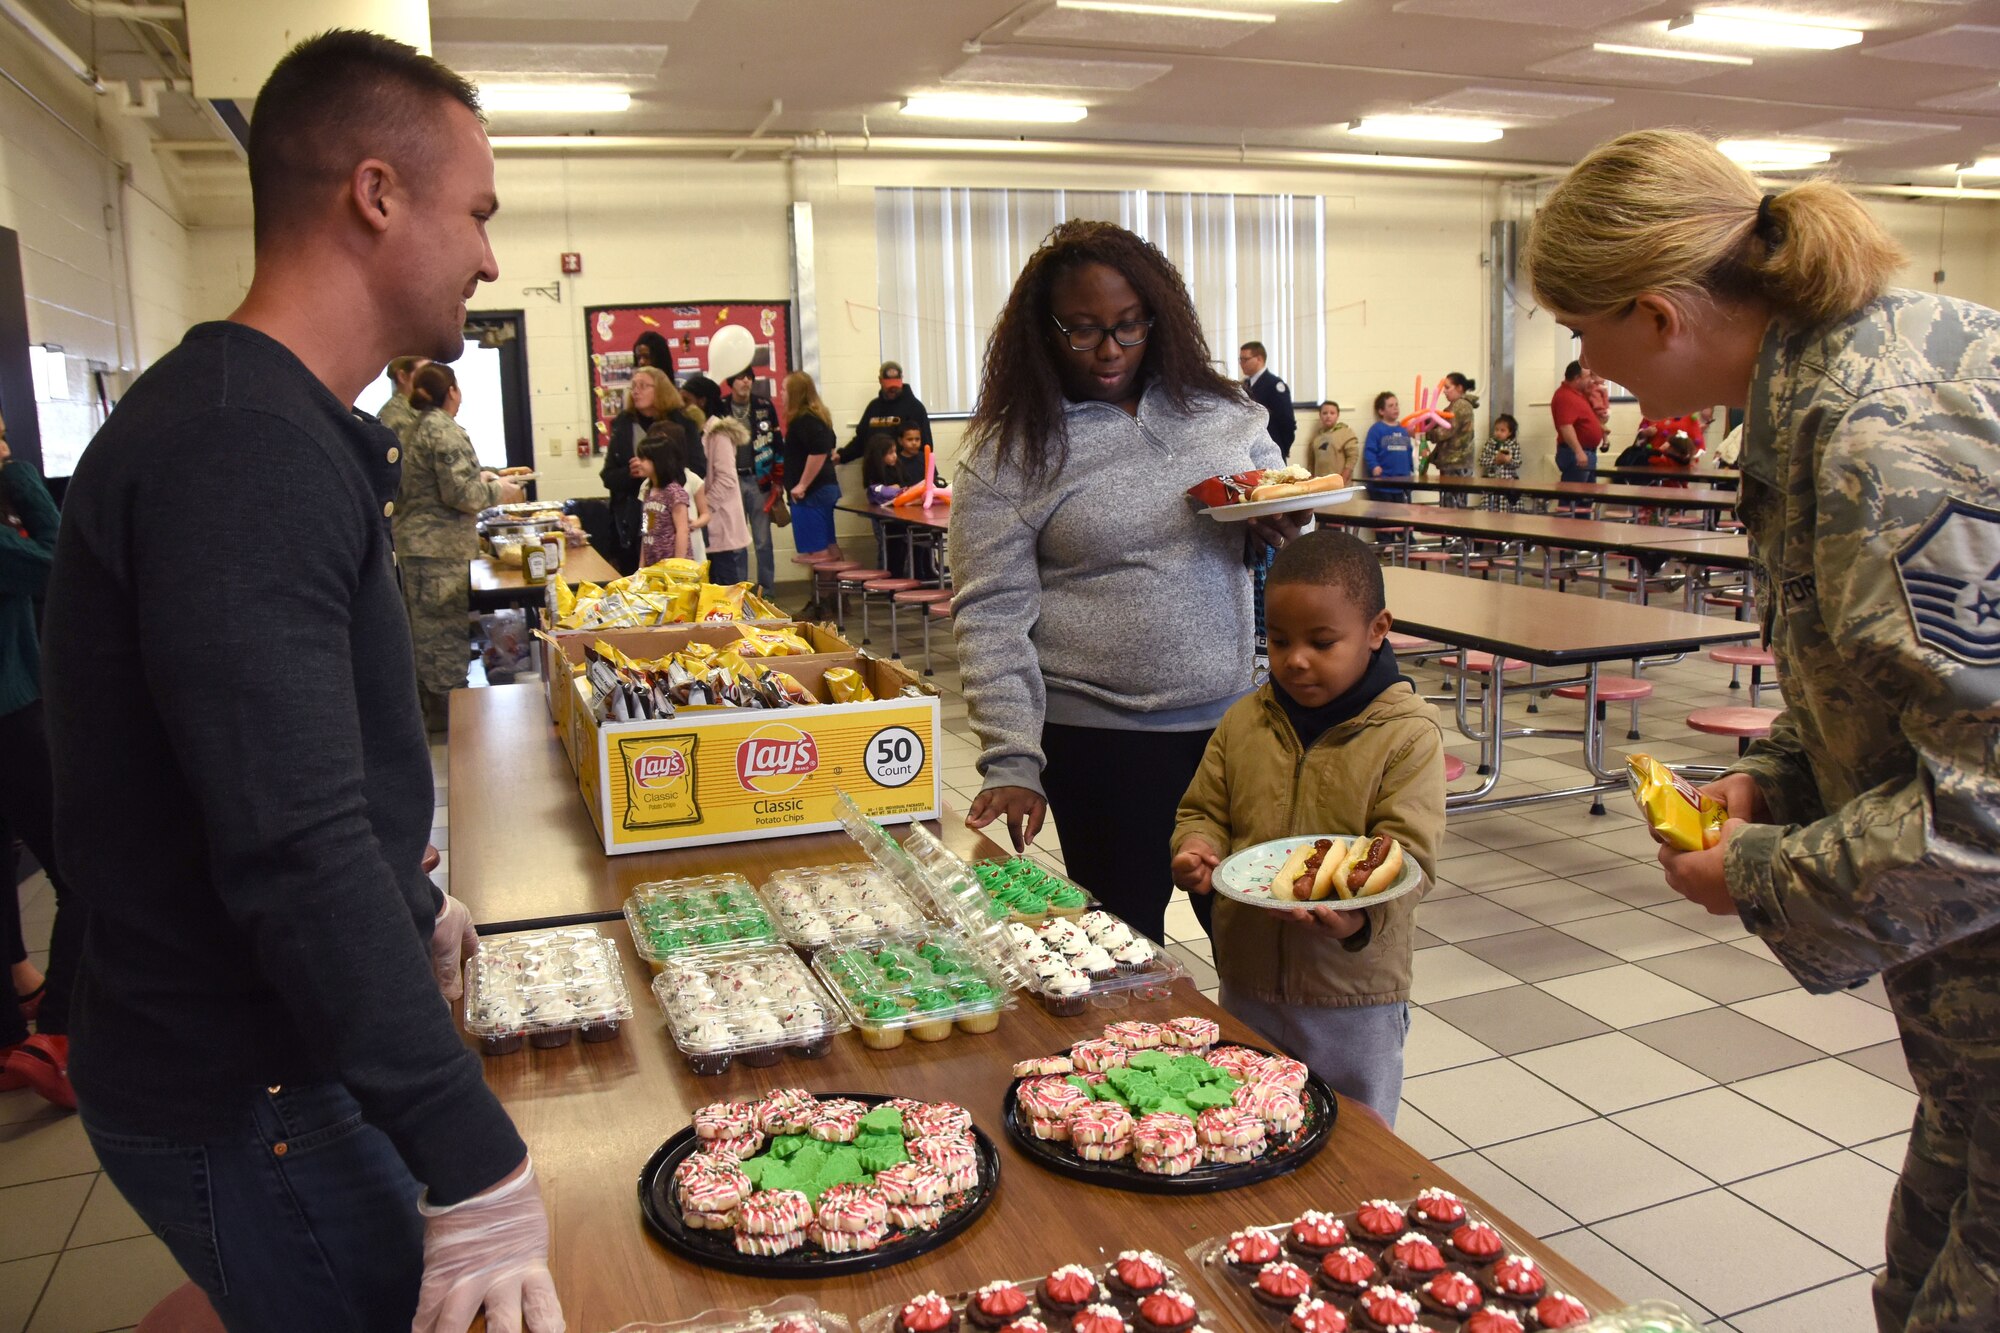 Volunteers from the North Carolina Air National Guard (NCANG) assist students with a hot lunch at Badin Elementary School (B.E.S.) during Operation Santa held at B.E.S., Badin, N.C., Dec. 14th, 2019.  Operation Santa is an annual event run by the Chapter 7 organization of the NCANG which chooses select schools to provide assistance to families during the holiday season. This year, the NCANG provided presents, lunch, music, bouncy castles and a Santa. The NCANG also partnered with the local Target for food donations.